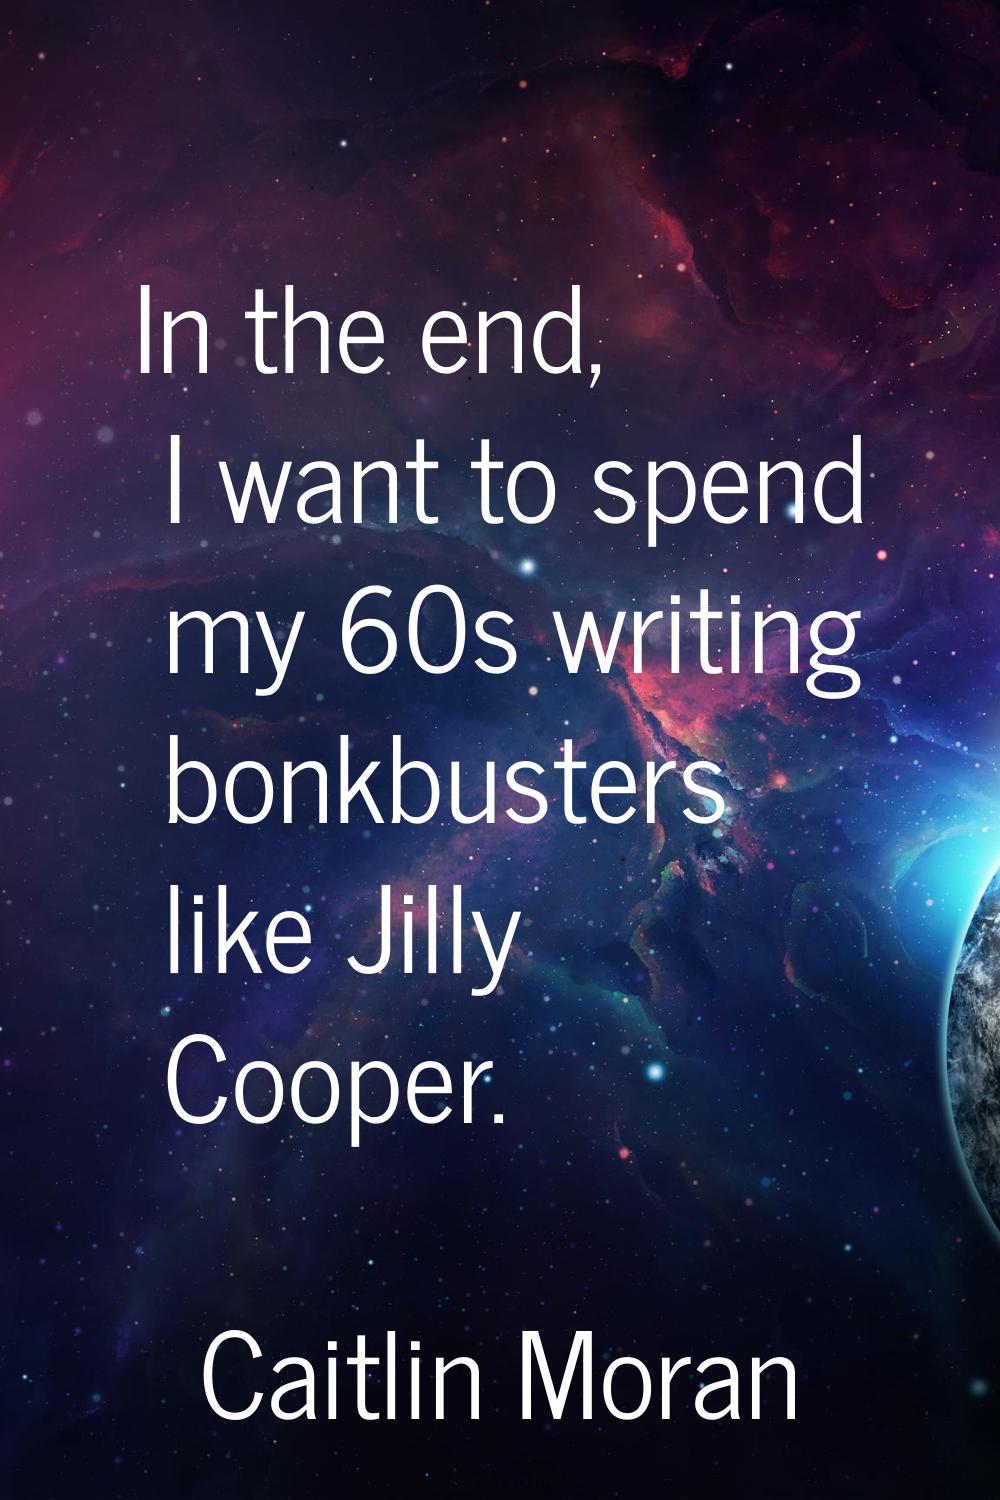 In the end, I want to spend my 60s writing bonkbusters like Jilly Cooper.